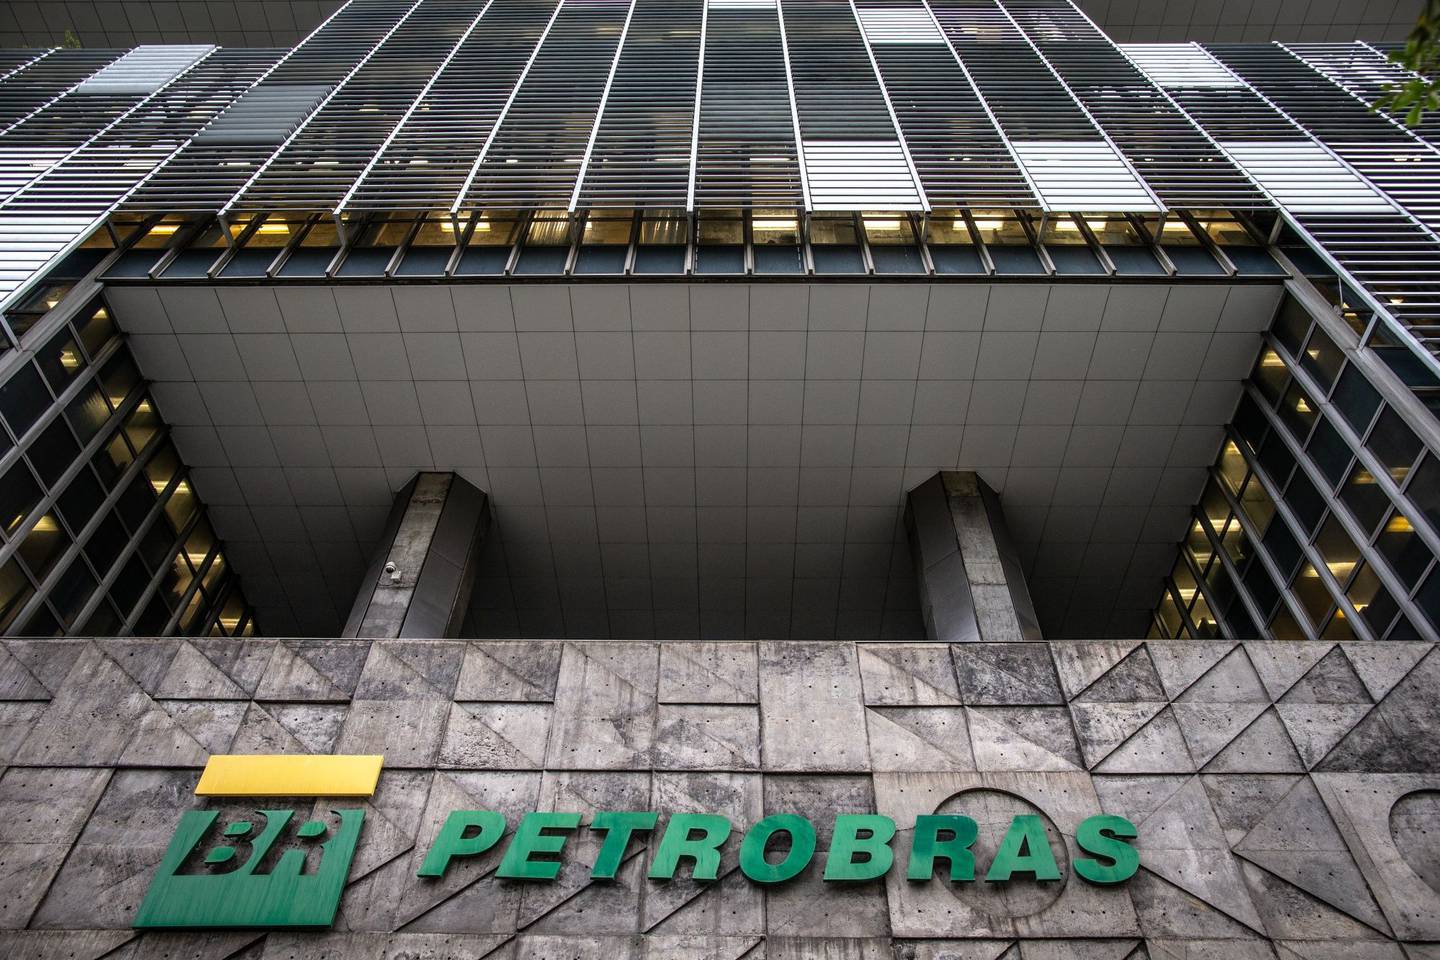 The Petroleo Brasileiro SA (Petrobras) headquarters in Rio de Janeiro, Brazil, on Friday, Feb. 19, 2021. Petrobras declined after President Jair Bolsonaro said that the company's fuel price increases have been excessive, undermining the company's efforts to dispel concerns about political interference.dfd